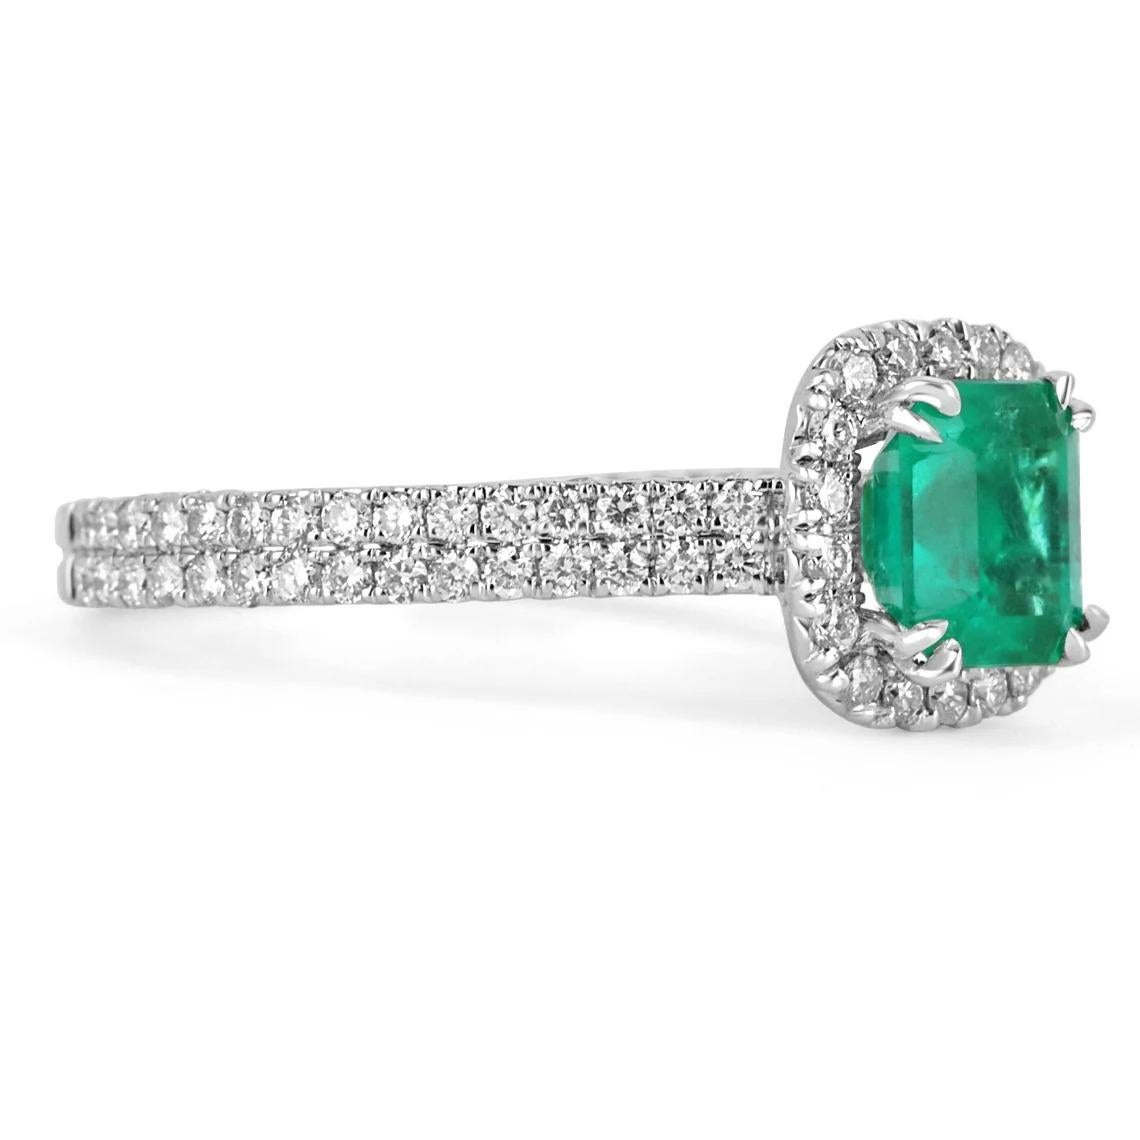 An exquisite AAA emerald and diamond engagement/right-hand ring. The gorgeous setting lets sit an excellent quality, earth-mined, natural emerald with beautiful color and excellent-very good eye clarity. Near colorless diamonds halo around the